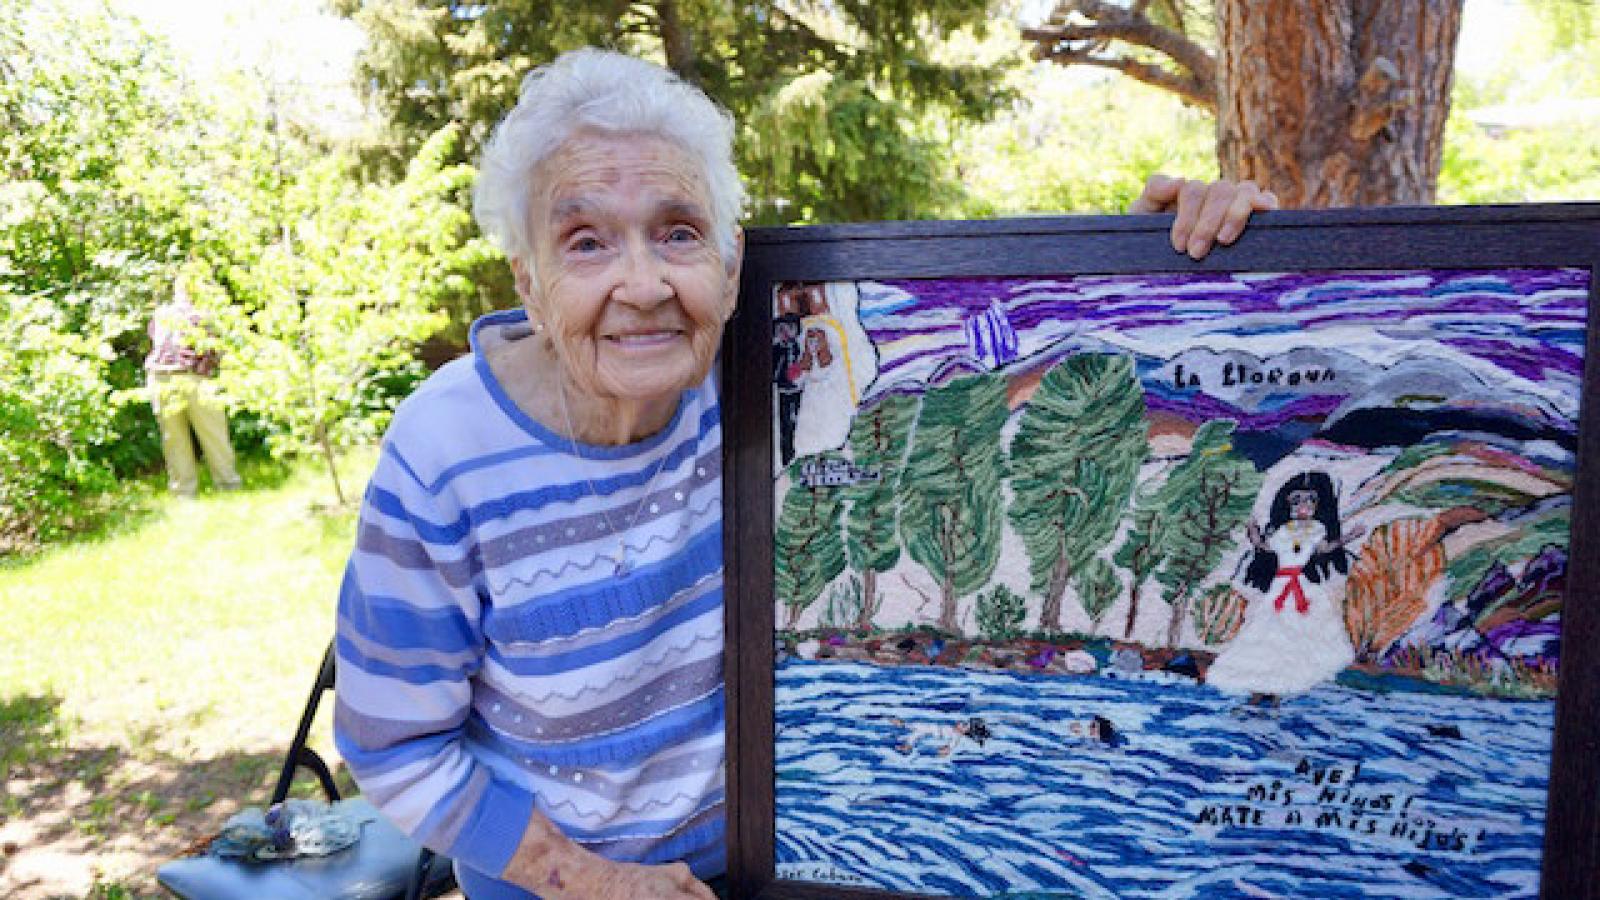 Josephine Lobato holding a piece of her embroidery